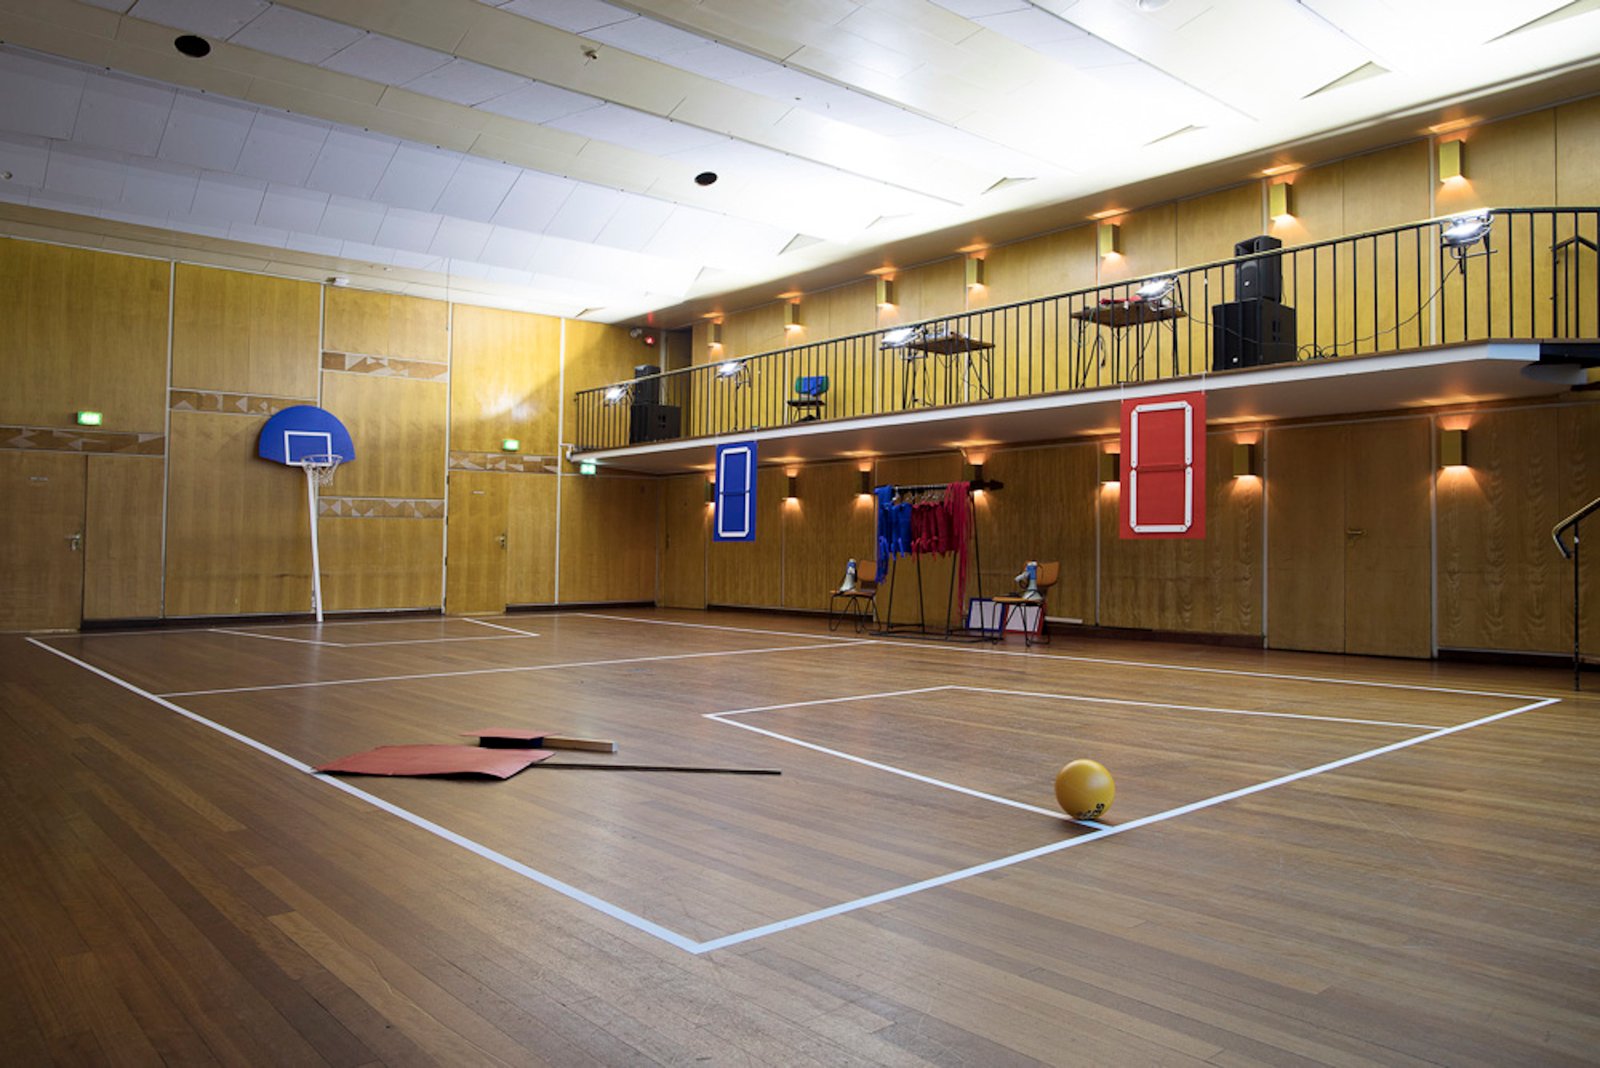 A basketball goal on a stick, score boards, costumes and picket signs in a room with wooden walls and floors and geometric decorations